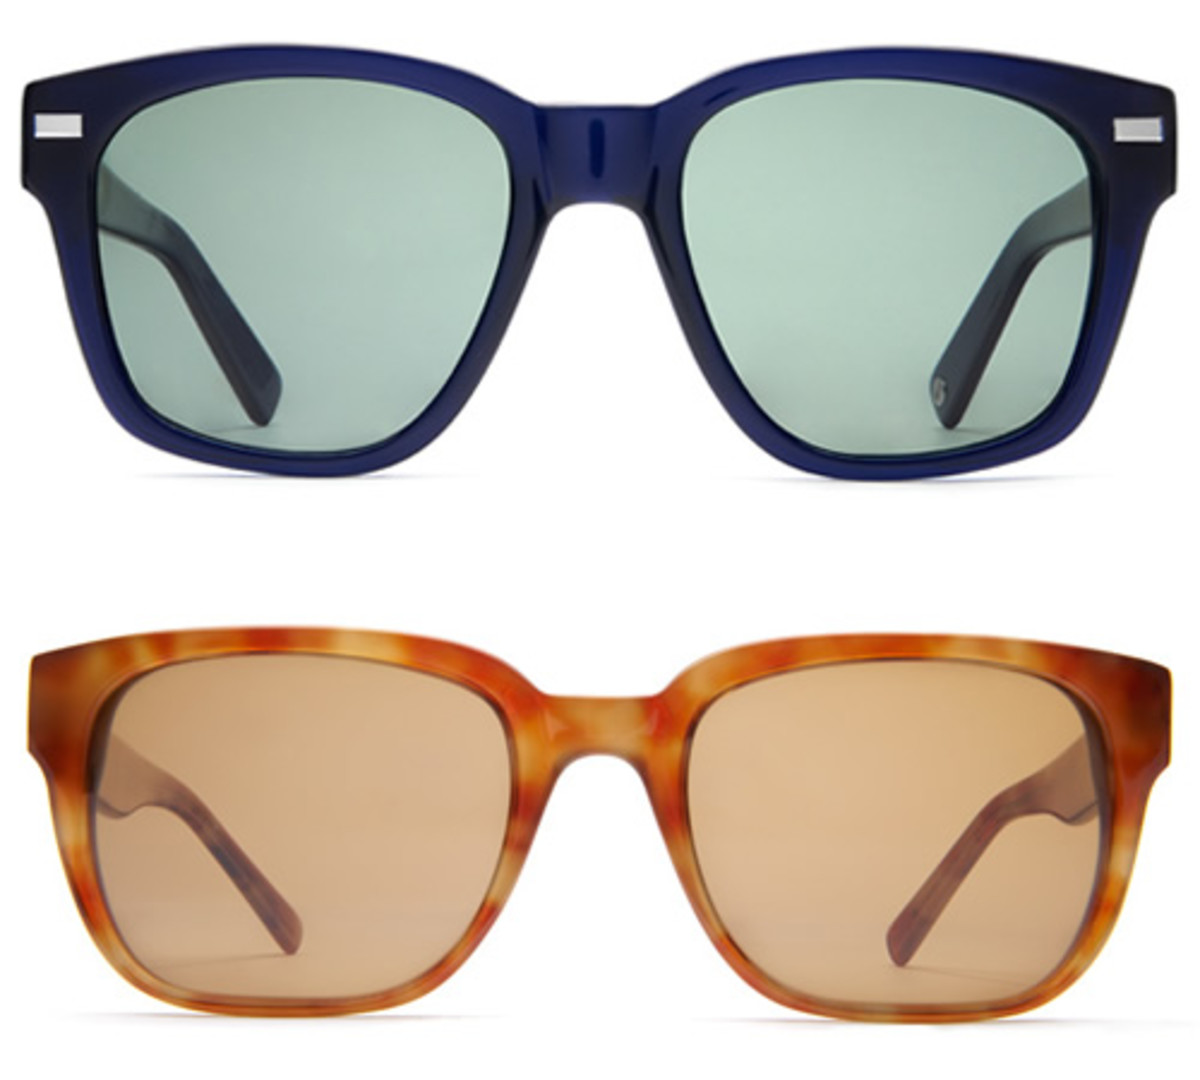 Warby Parker Sunwear - Acquire